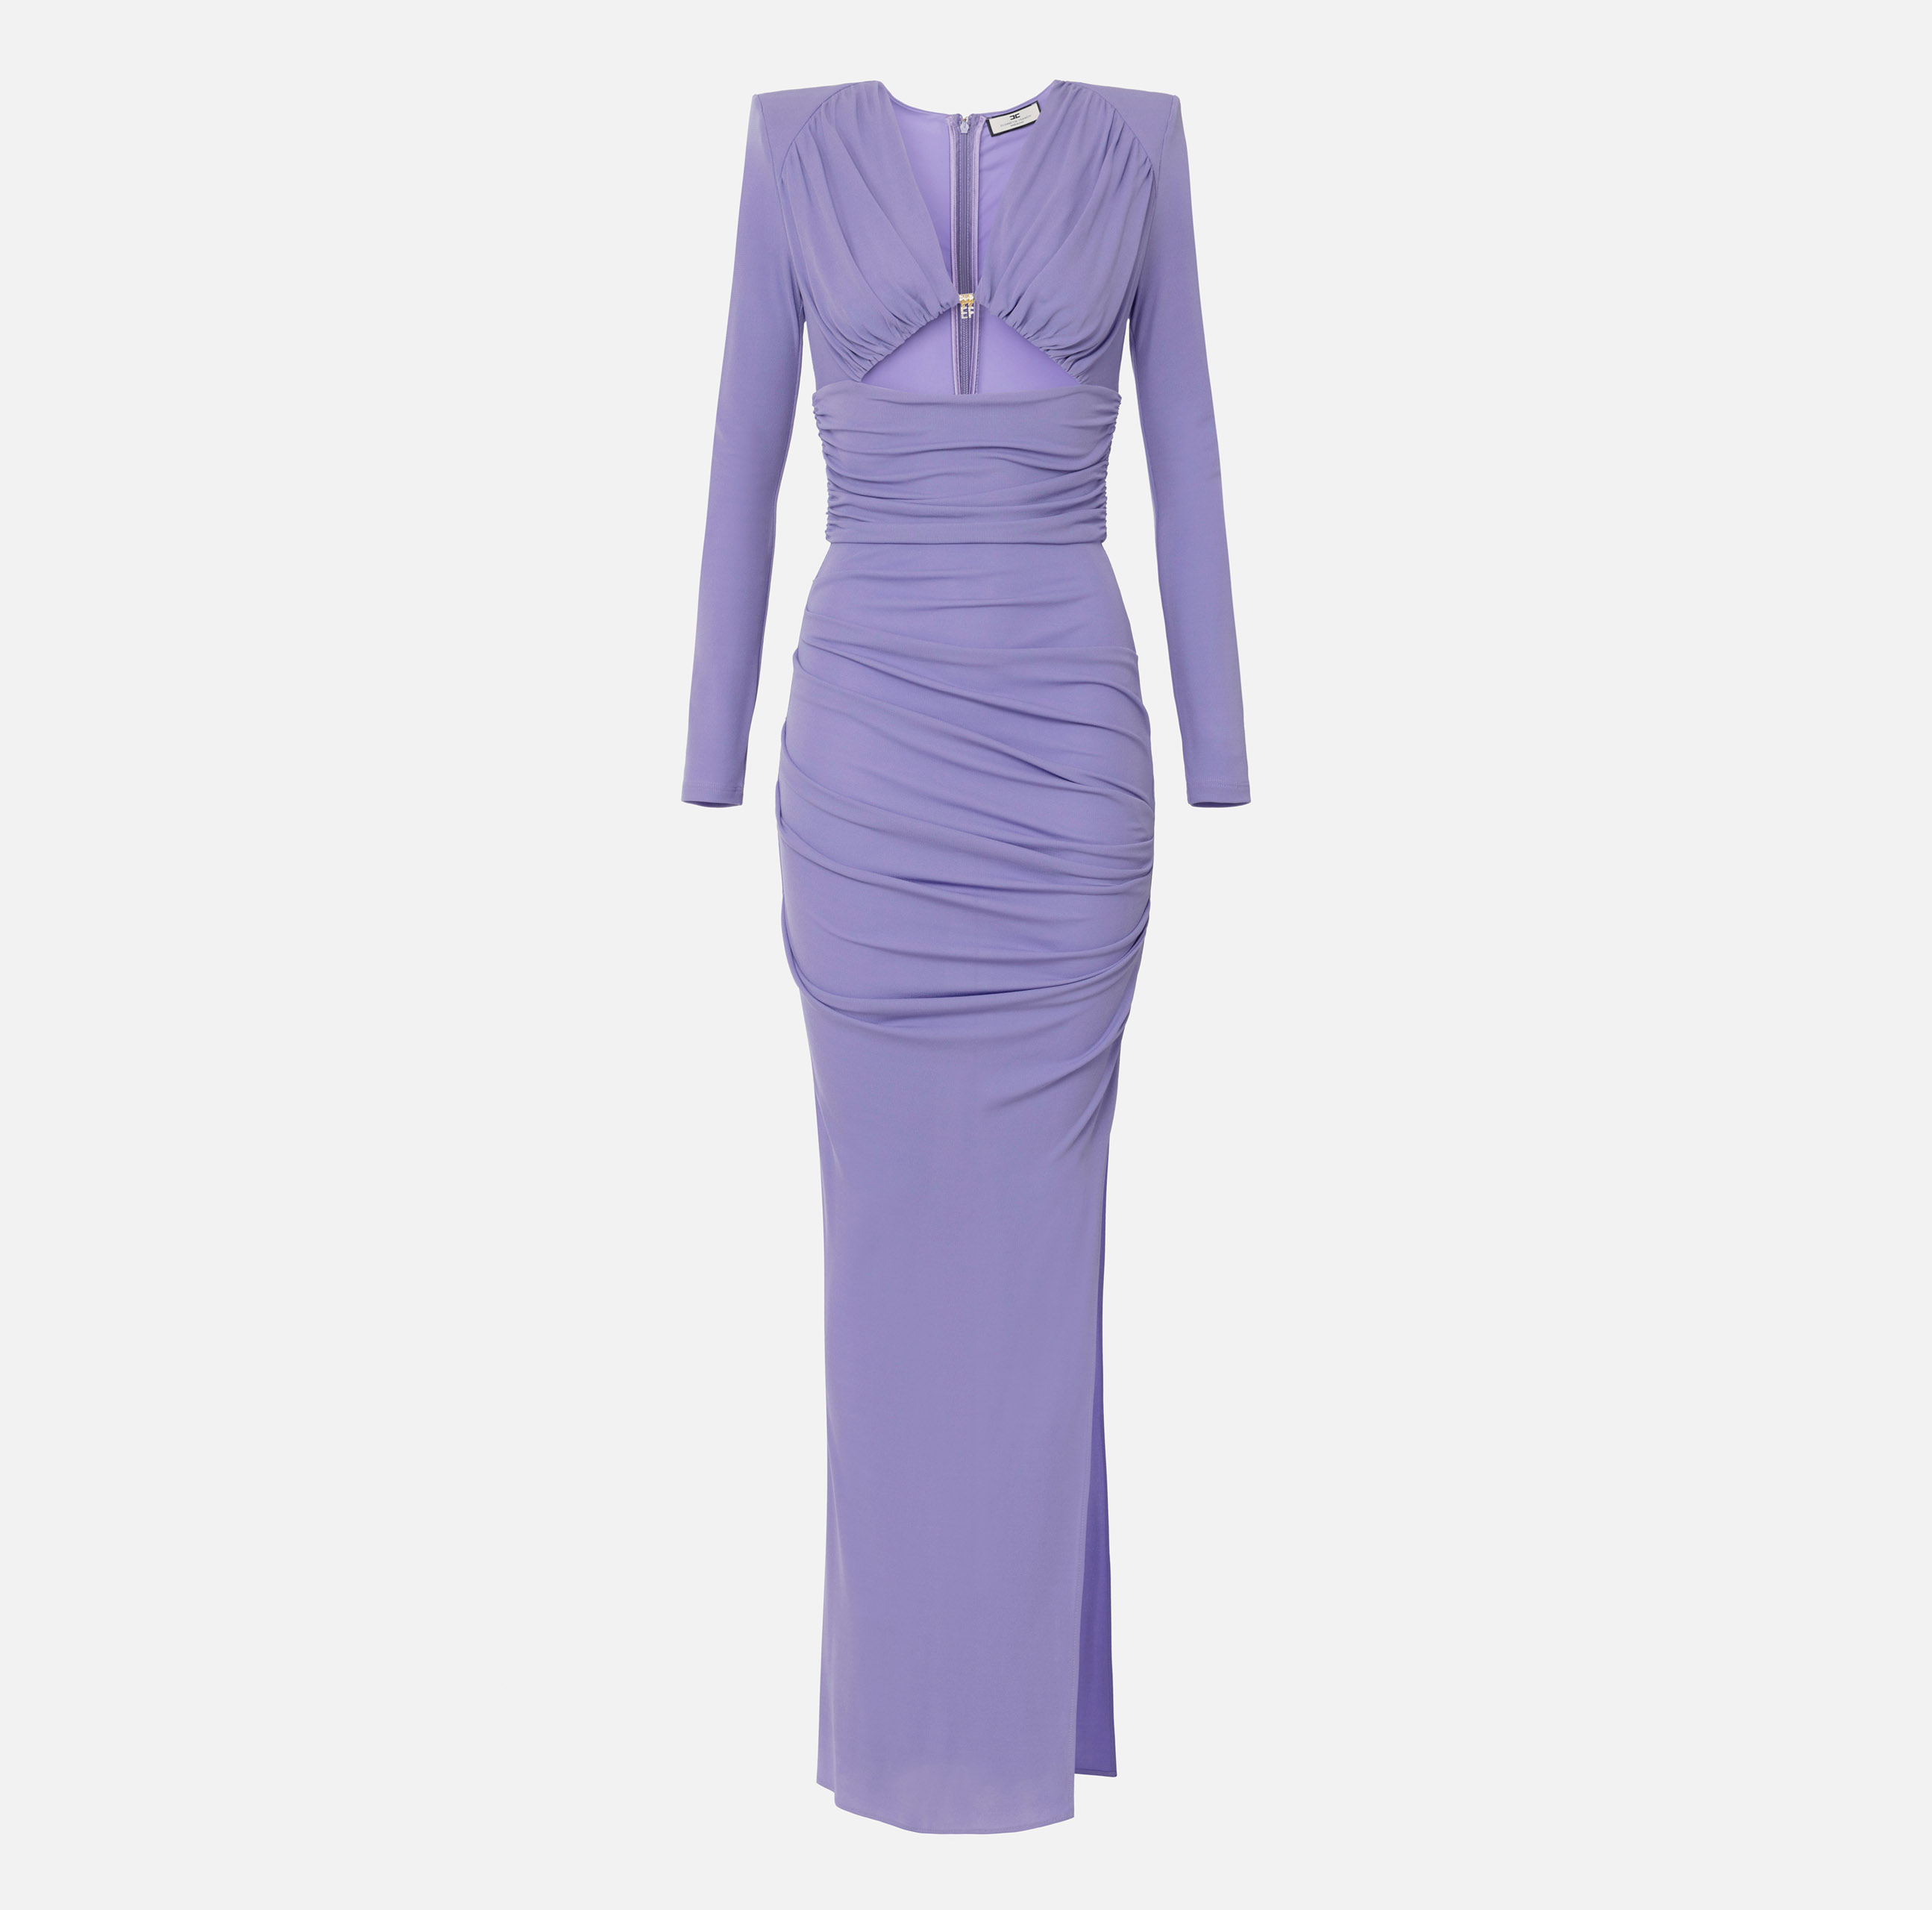 Red carpet dress in draped jersey with cut-out - ABBIGLIAMENTO - Elisabetta Franchi